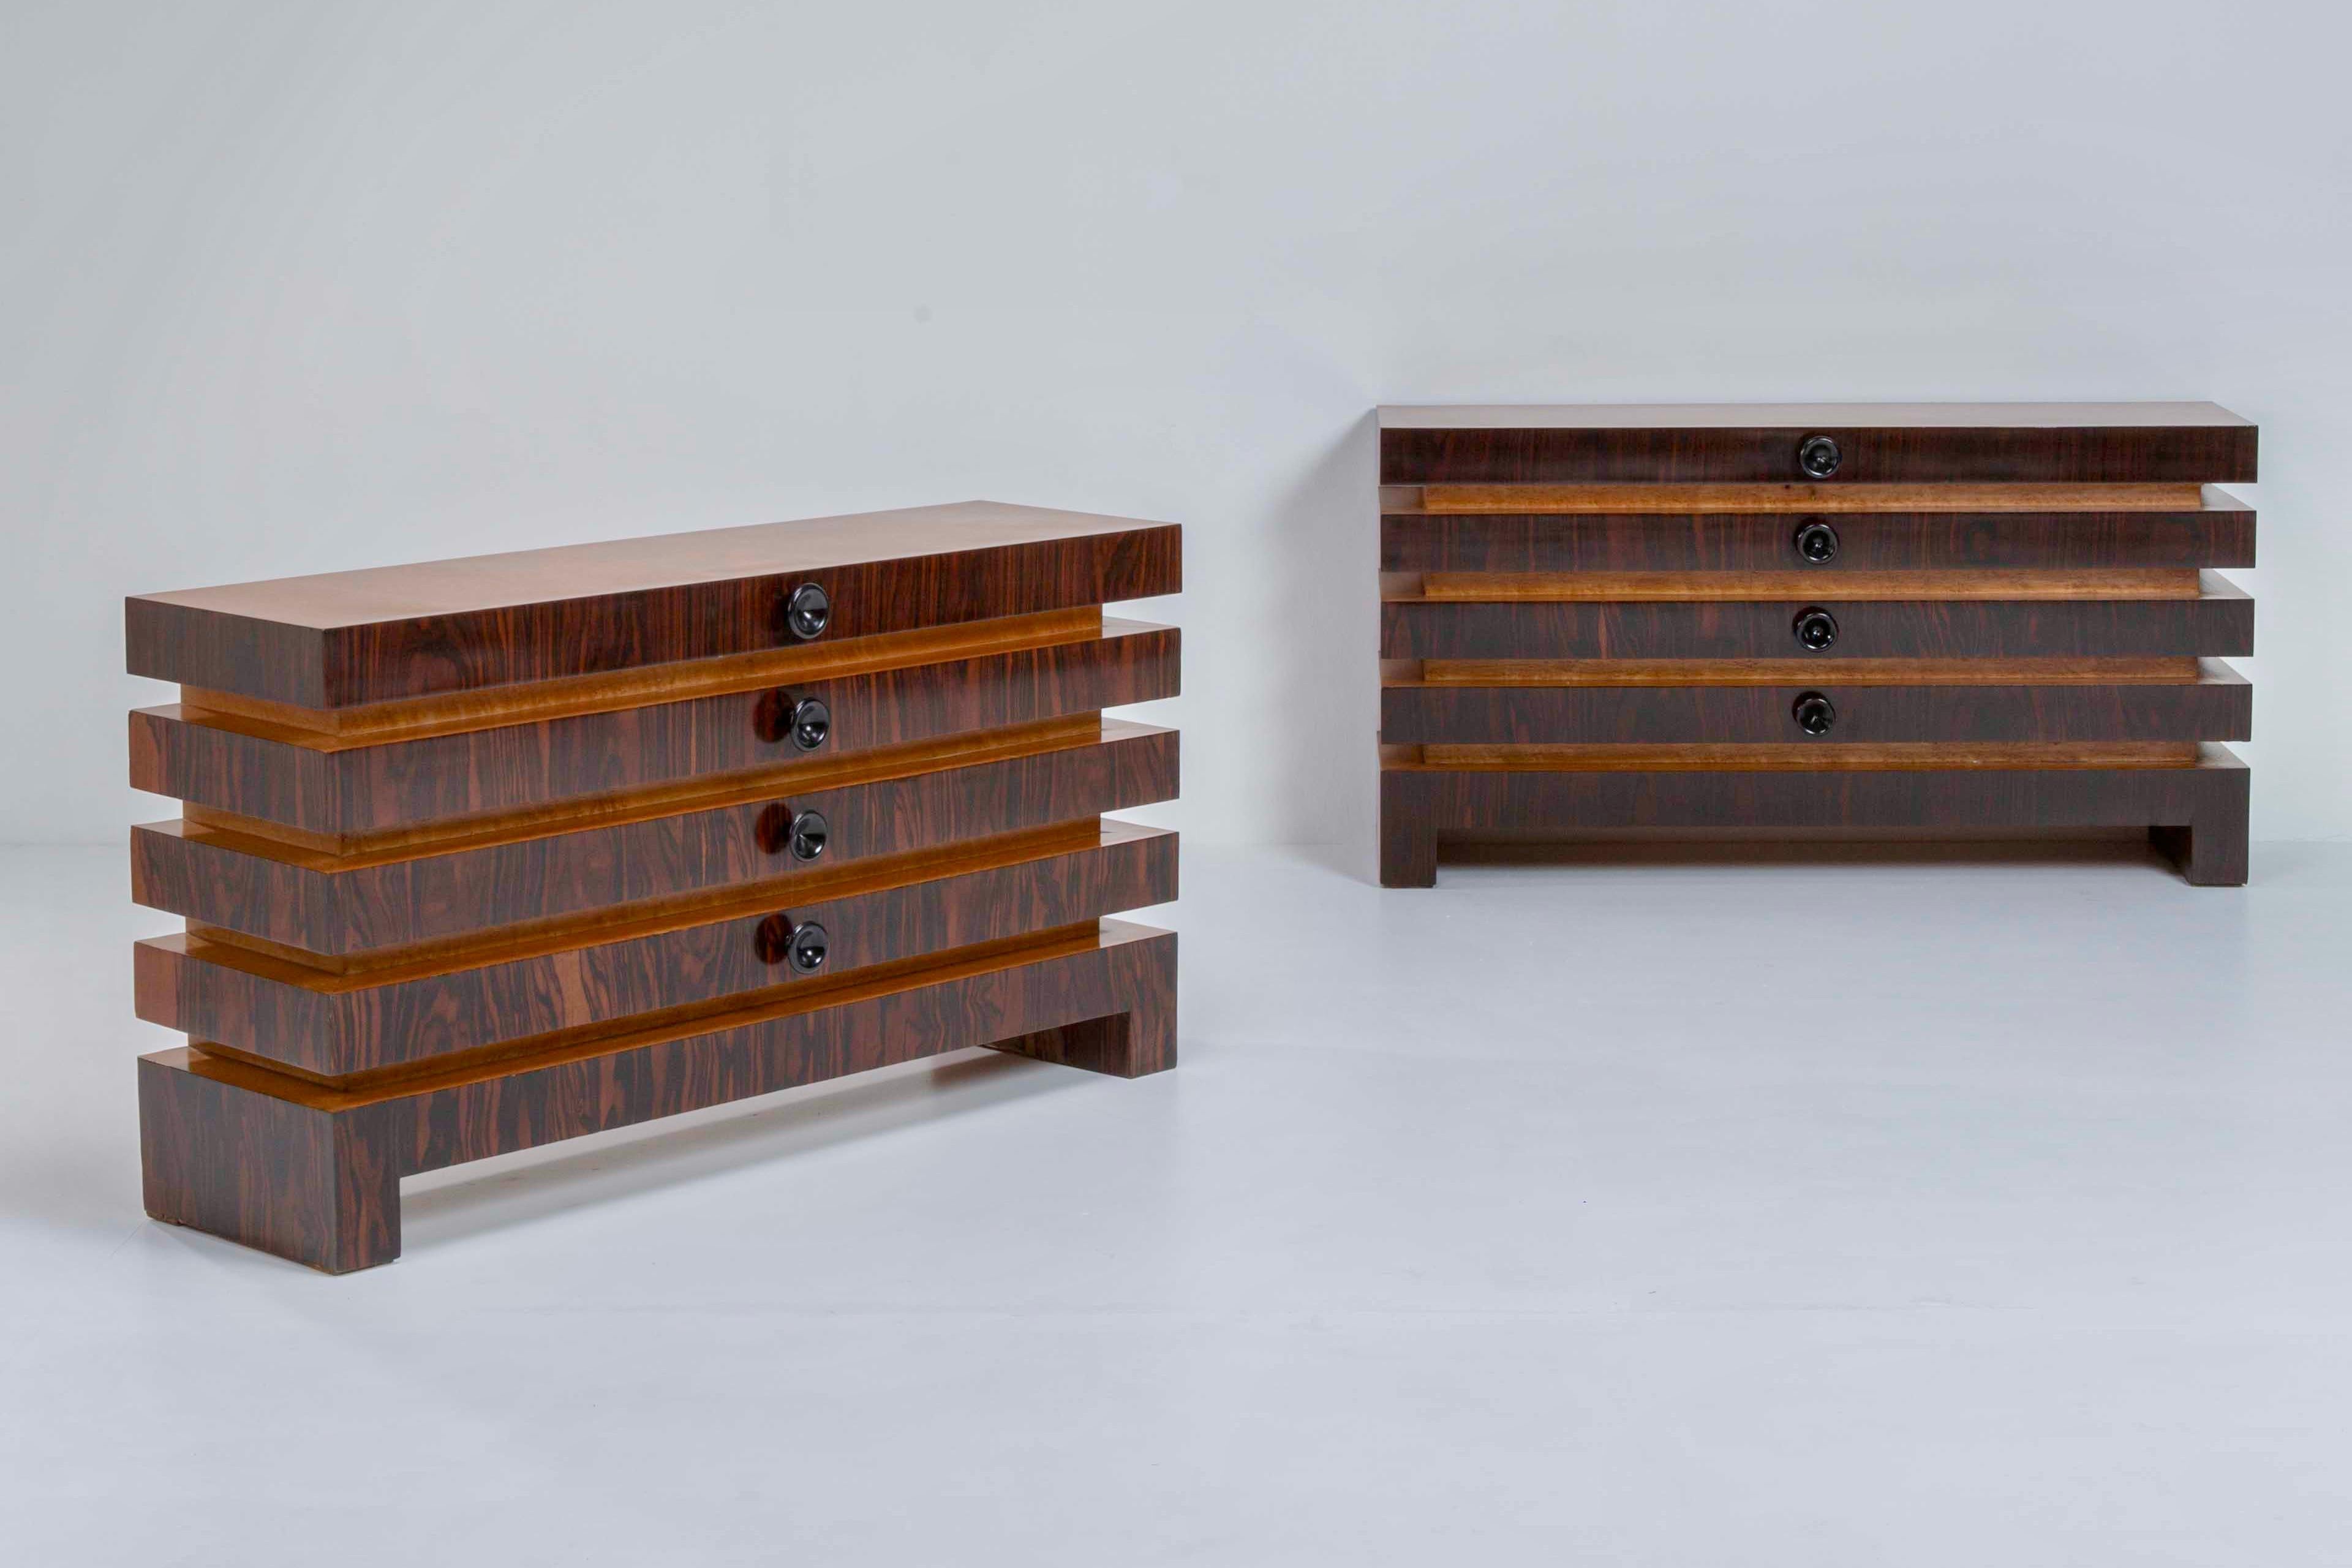 These two wood consoles are stunning interiors of Mid-Century Italian Design. Boasting sleek linear shapes, the consolles embody elegance and sophistication. Crafted with precision, they captures the essence of minimalist luxury. These consolles are